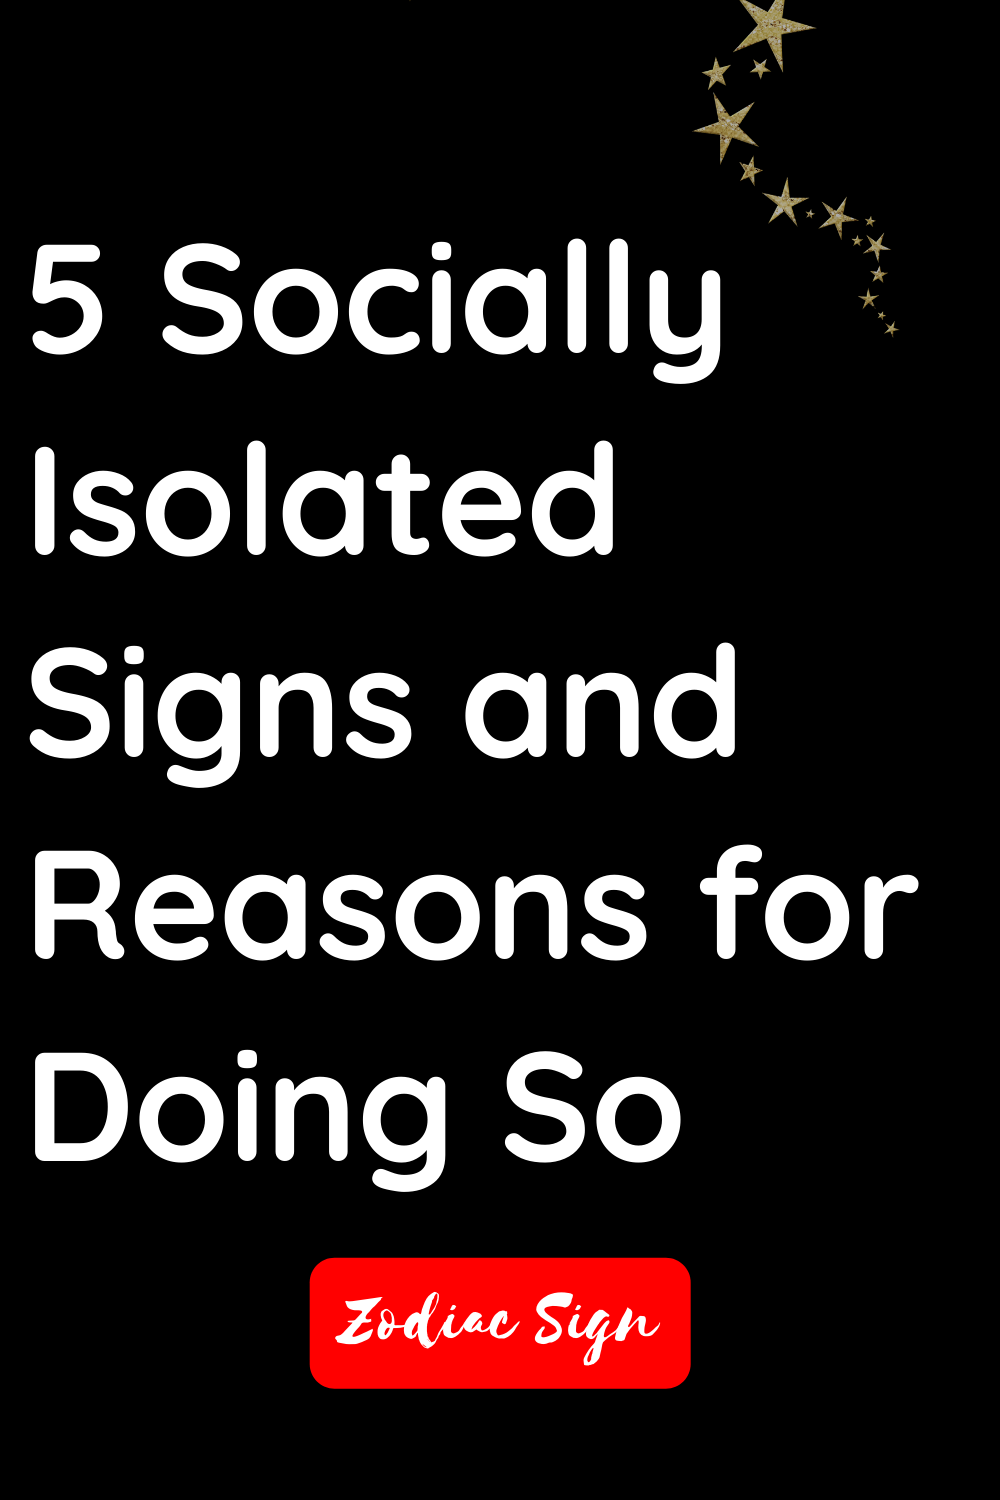 5 socially isolated signs and reasons for doing so